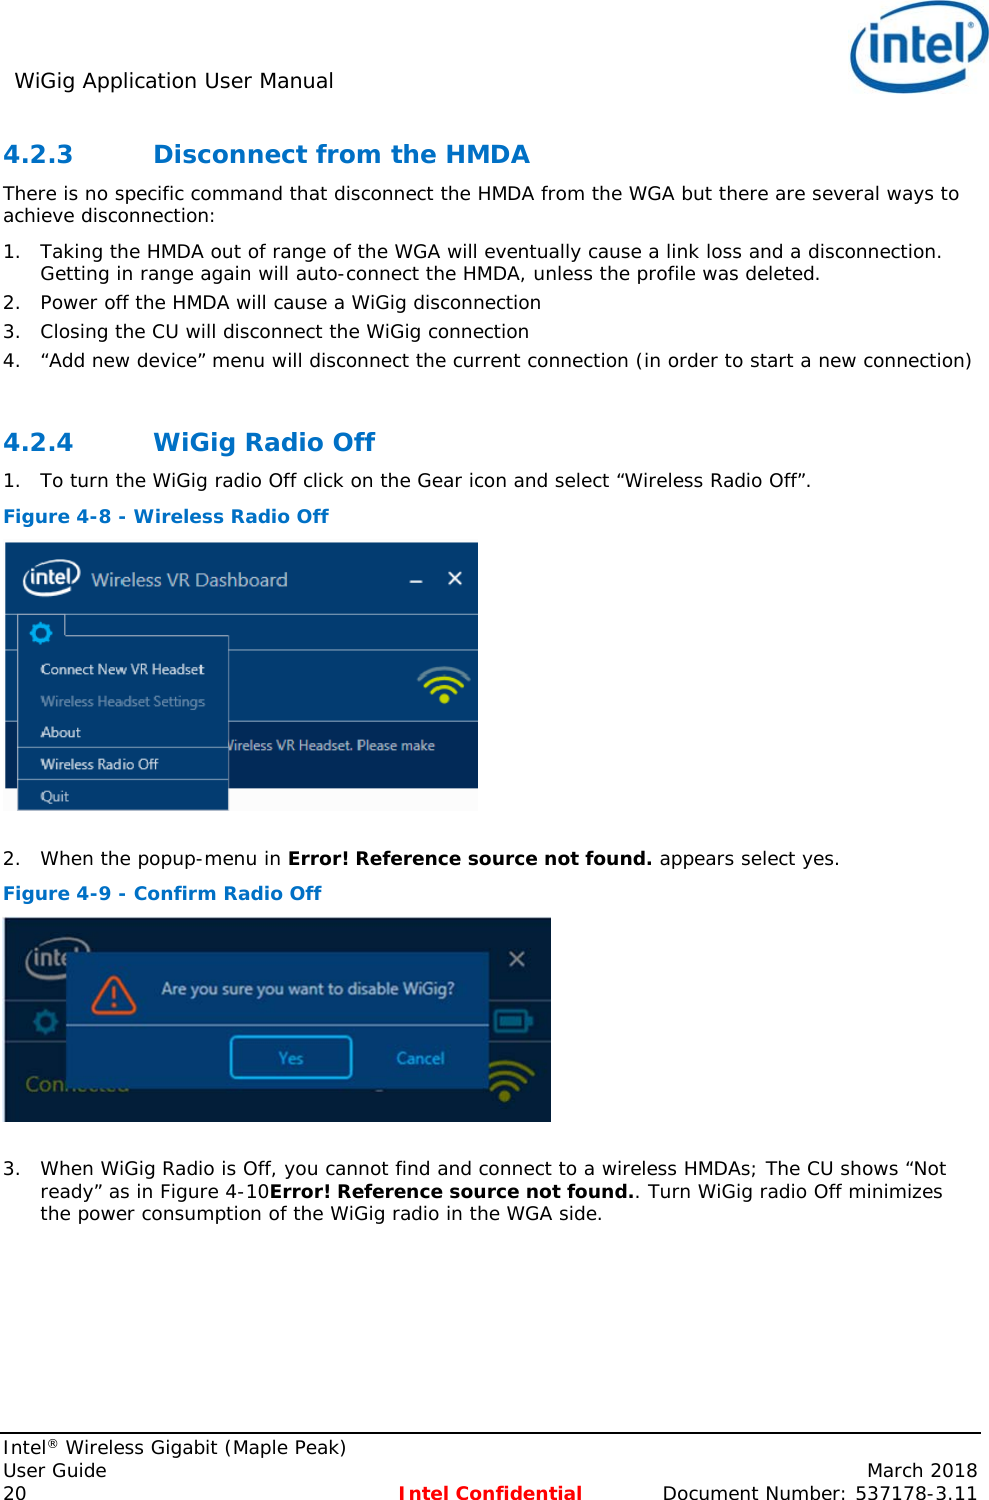 WiGig Application User Manual     Intel® Wireless Gigabit (Maple Peak) User Guide    March 2018 20 Intel Confidential  Document Number: 537178-3.11 4.2.3 Disconnect from the HMDA There is no specific command that disconnect the HMDA from the WGA but there are several ways to achieve disconnection: 1. Taking the HMDA out of range of the WGA will eventually cause a link loss and a disconnection. Getting in range again will auto-connect the HMDA, unless the profile was deleted. 2. Power off the HMDA will cause a WiGig disconnection 3. Closing the CU will disconnect the WiGig connection 4. “Add new device” menu will disconnect the current connection (in order to start a new connection)  4.2.4 WiGig Radio Off 1. To turn the WiGig radio Off click on the Gear icon and select “Wireless Radio Off”.  Figure 4-8 - Wireless Radio Off   2. When the popup-menu in Error! Reference source not found. appears select yes. Figure 4-9 - Confirm Radio Off   3. When WiGig Radio is Off, you cannot find and connect to a wireless HMDAs; The CU shows “Not ready” as in Figure 4-10Error! Reference source not found.. Turn WiGig radio Off minimizes the power consumption of the WiGig radio in the WGA side. 